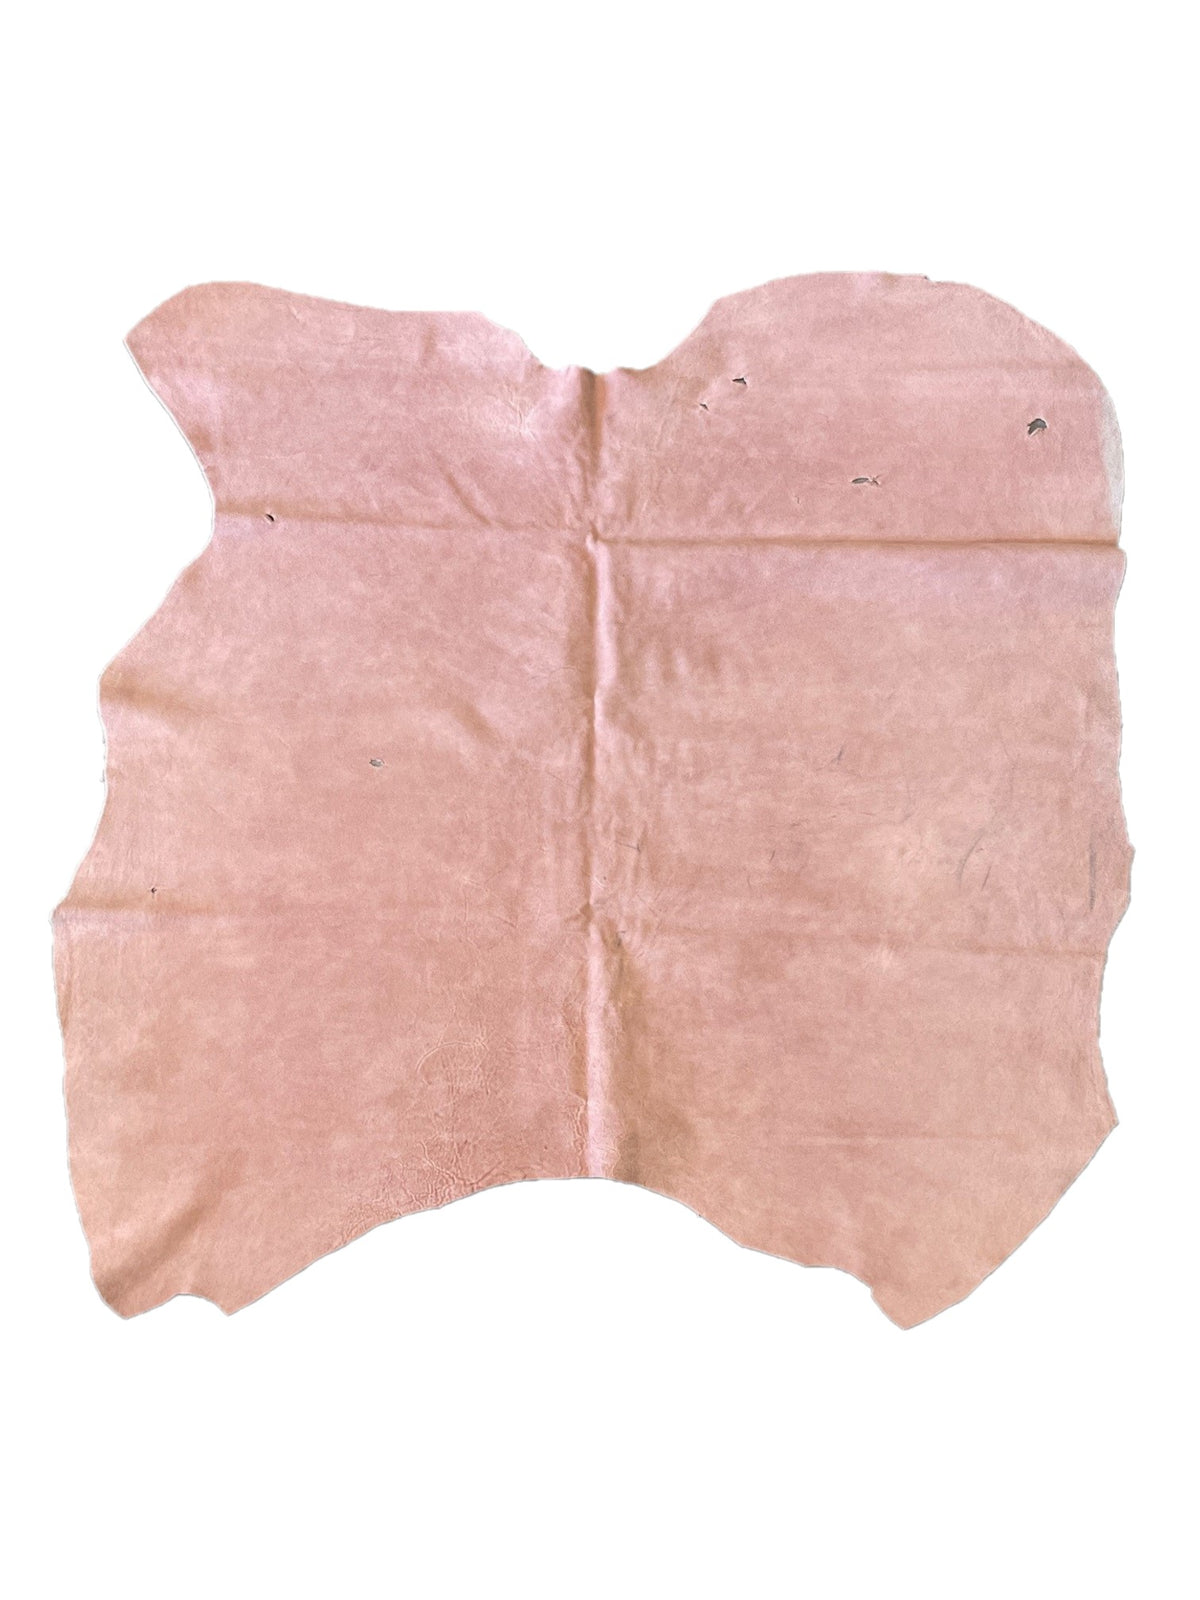 Suede Pale Pink Cow Double Butt (Special) | 1.4mm | 15 sq.ft | $28 ea.